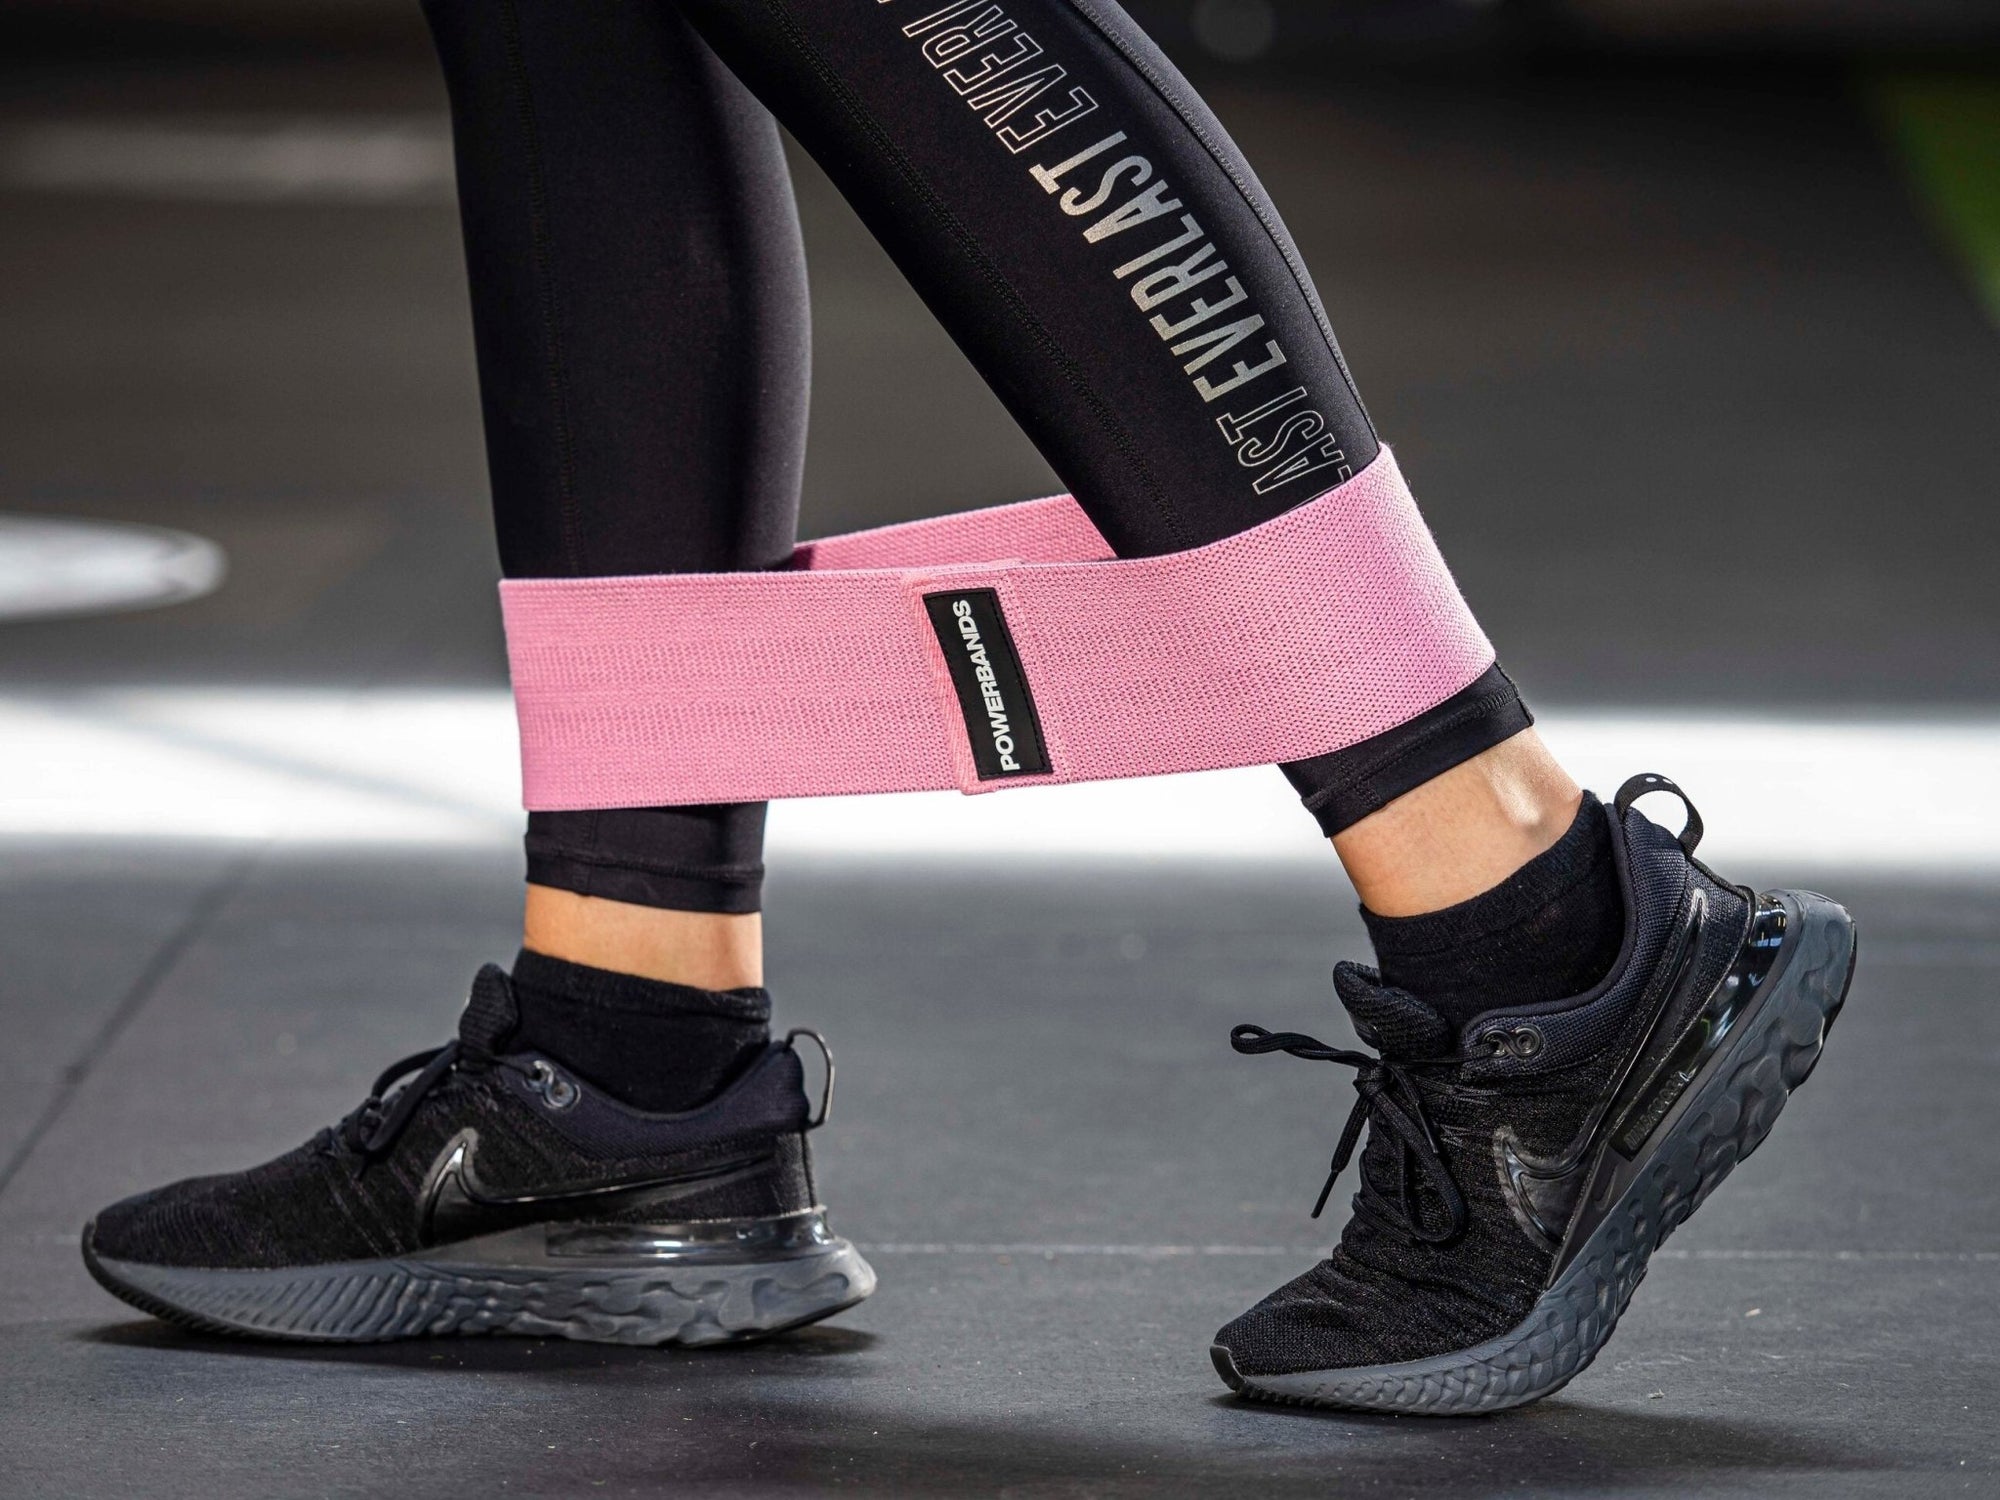 What to Know About Fabric Resistance Bands - A Guideline - POWERBANDS®